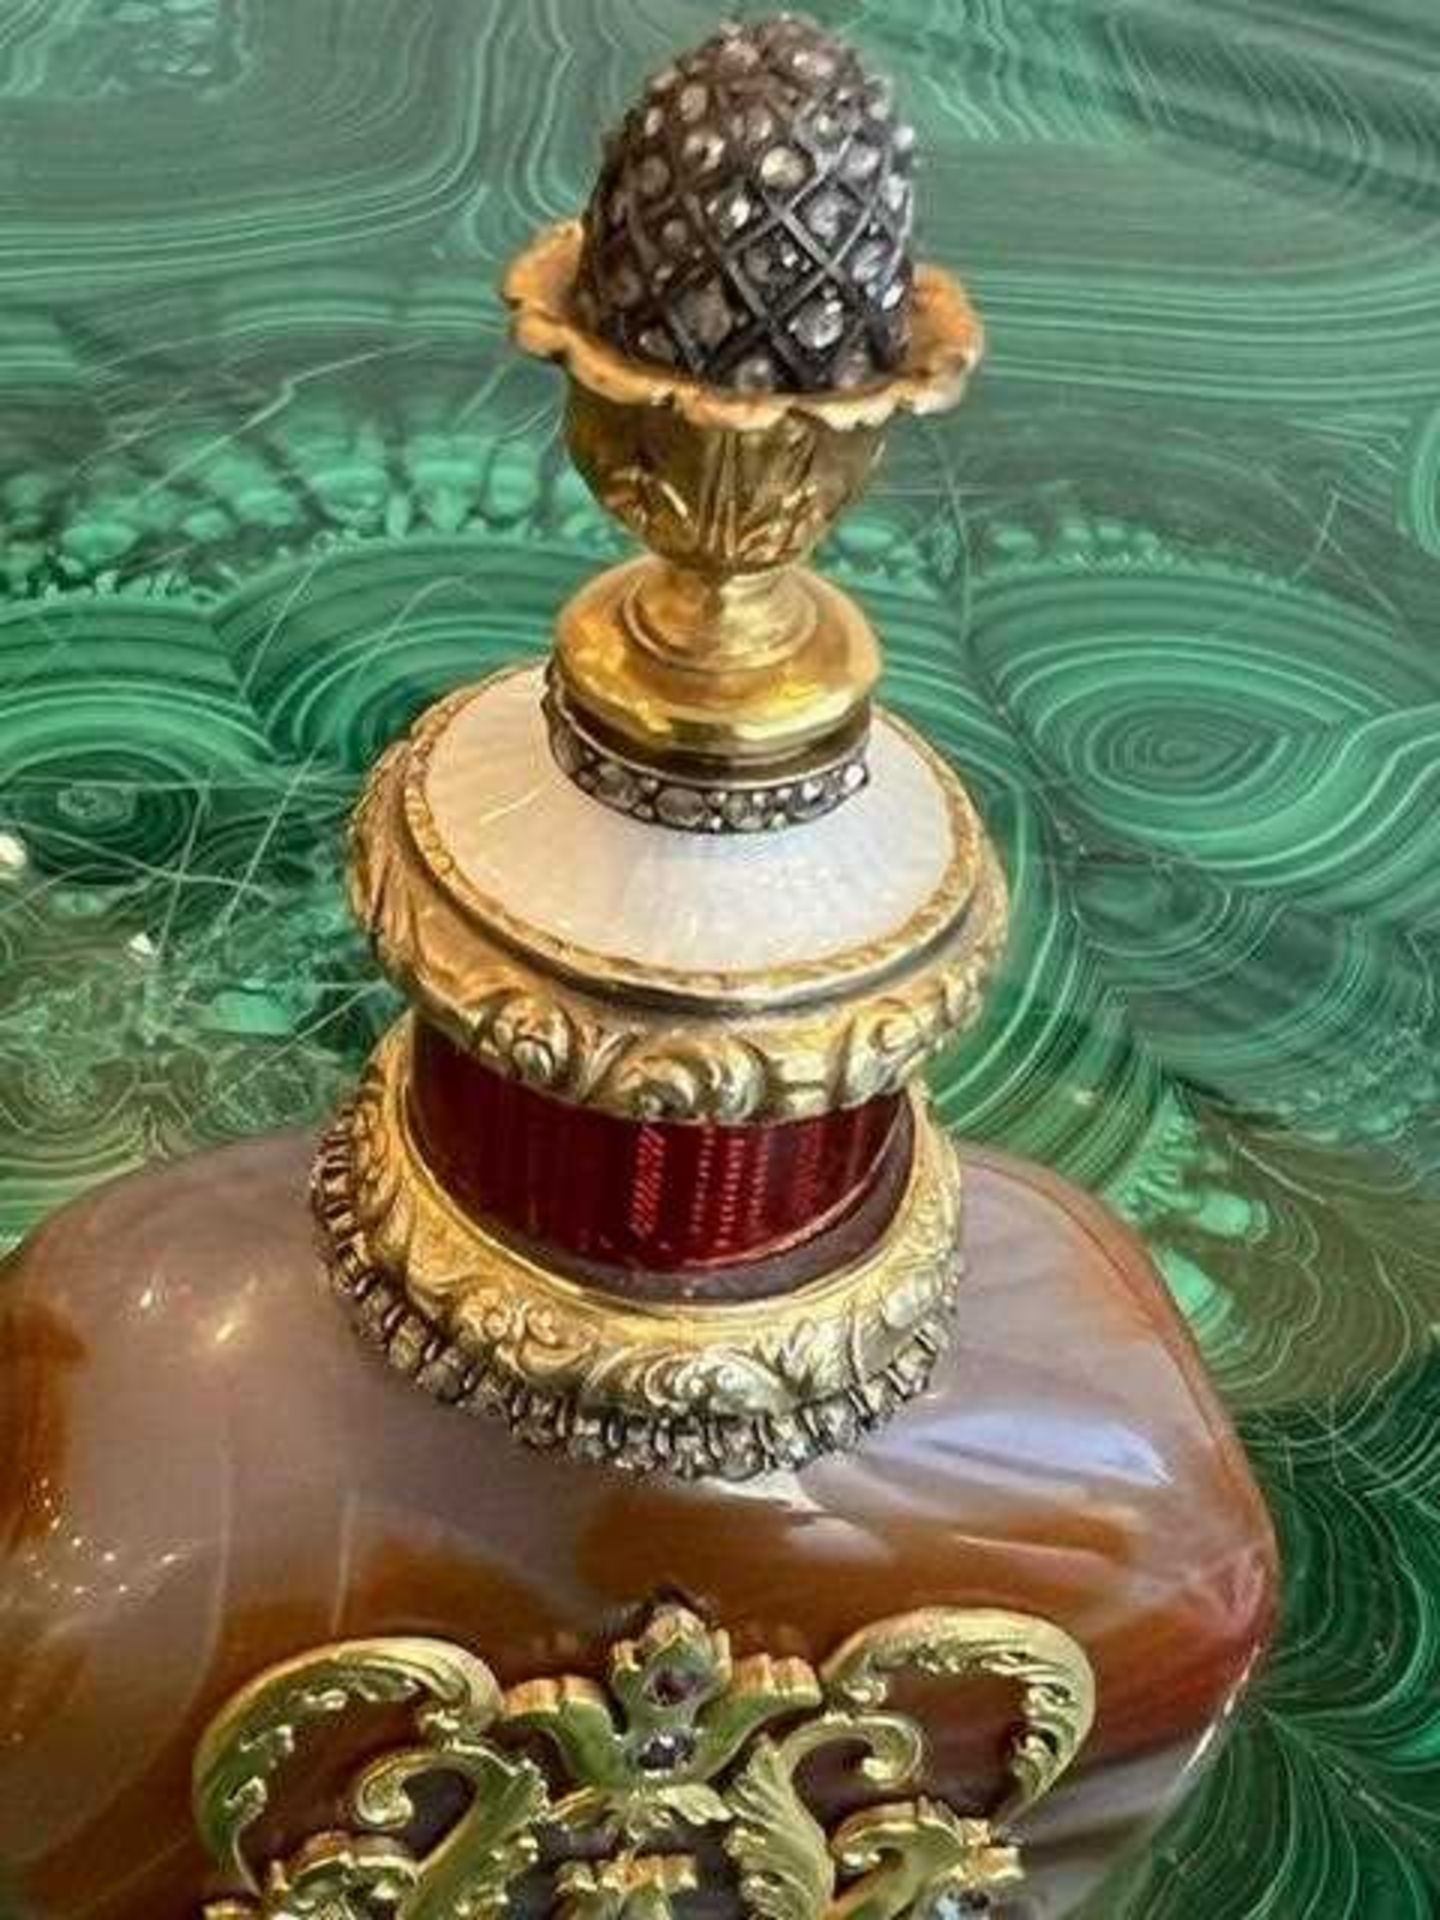 A FABERGE STYLE SILVER GILT, DIAMOND AND ENAMEL MOUNTED AGATE PERFUME BOTTLE - Image 9 of 14